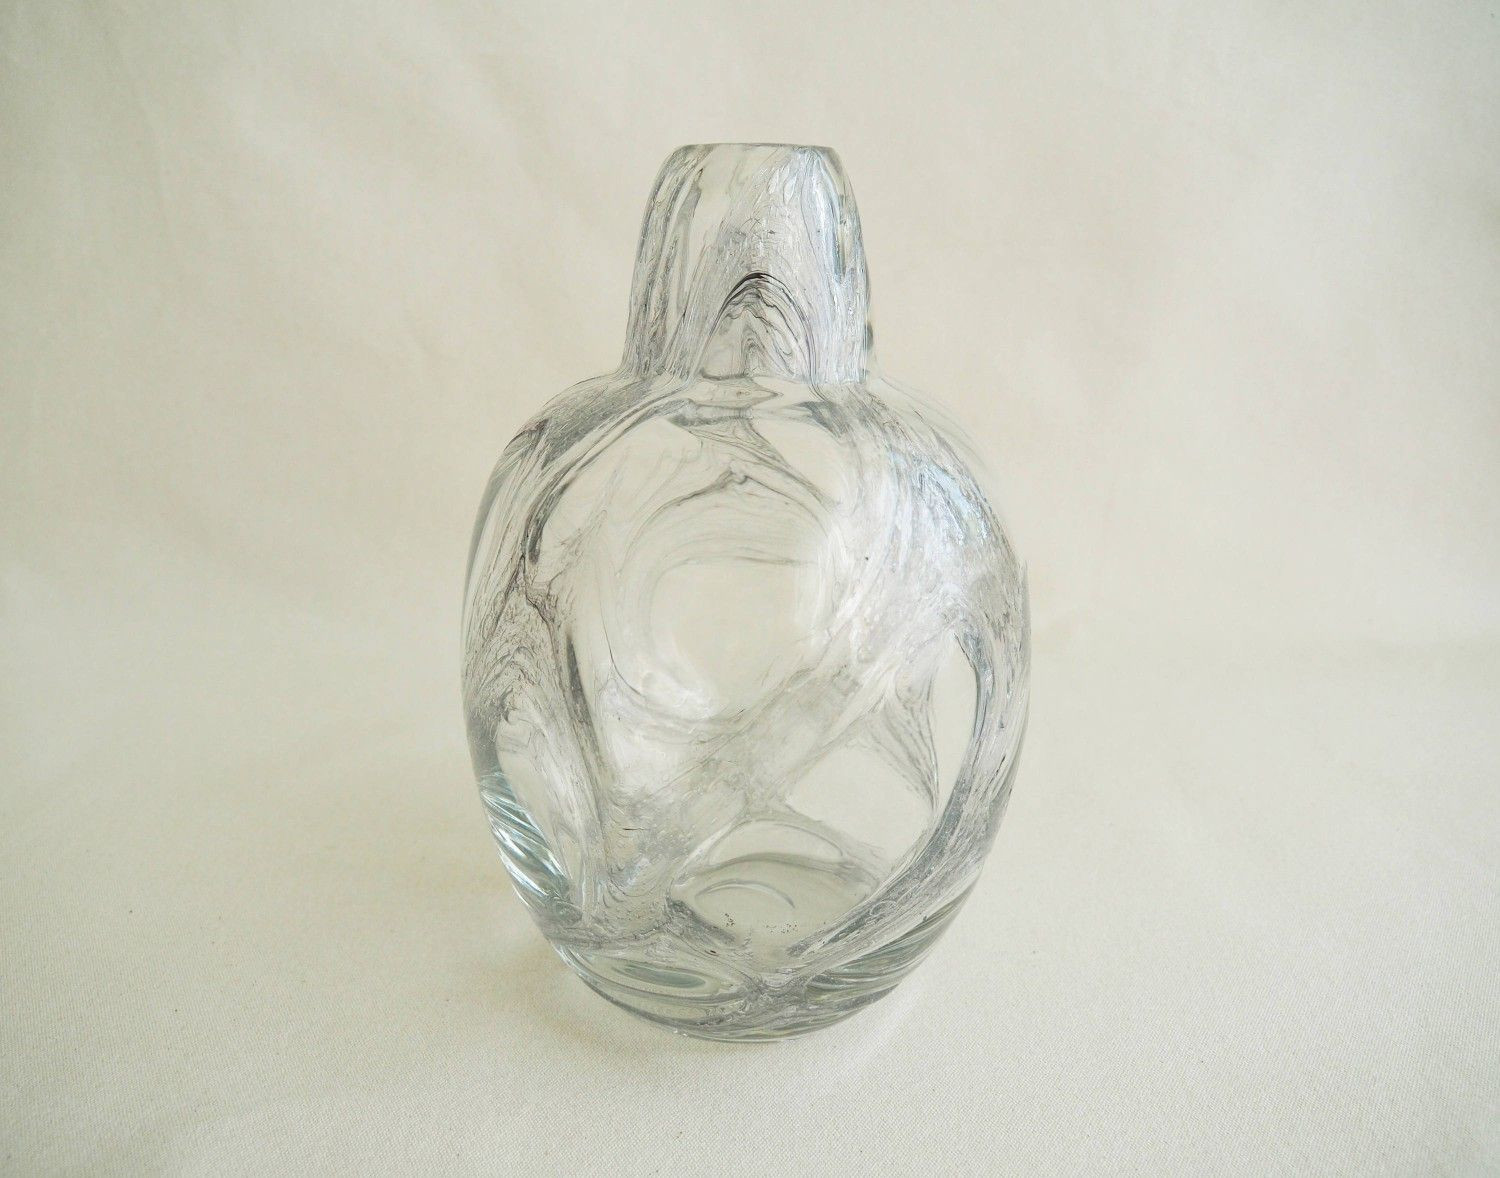 Thin Glass Vase Of Rare Vintage Czech Clear Glass Midcentury Vase Our Treasures for Intended for Rare Vintage Vase Made From Clear Glass In Czechoslovakia During the Second Half Of the 20th